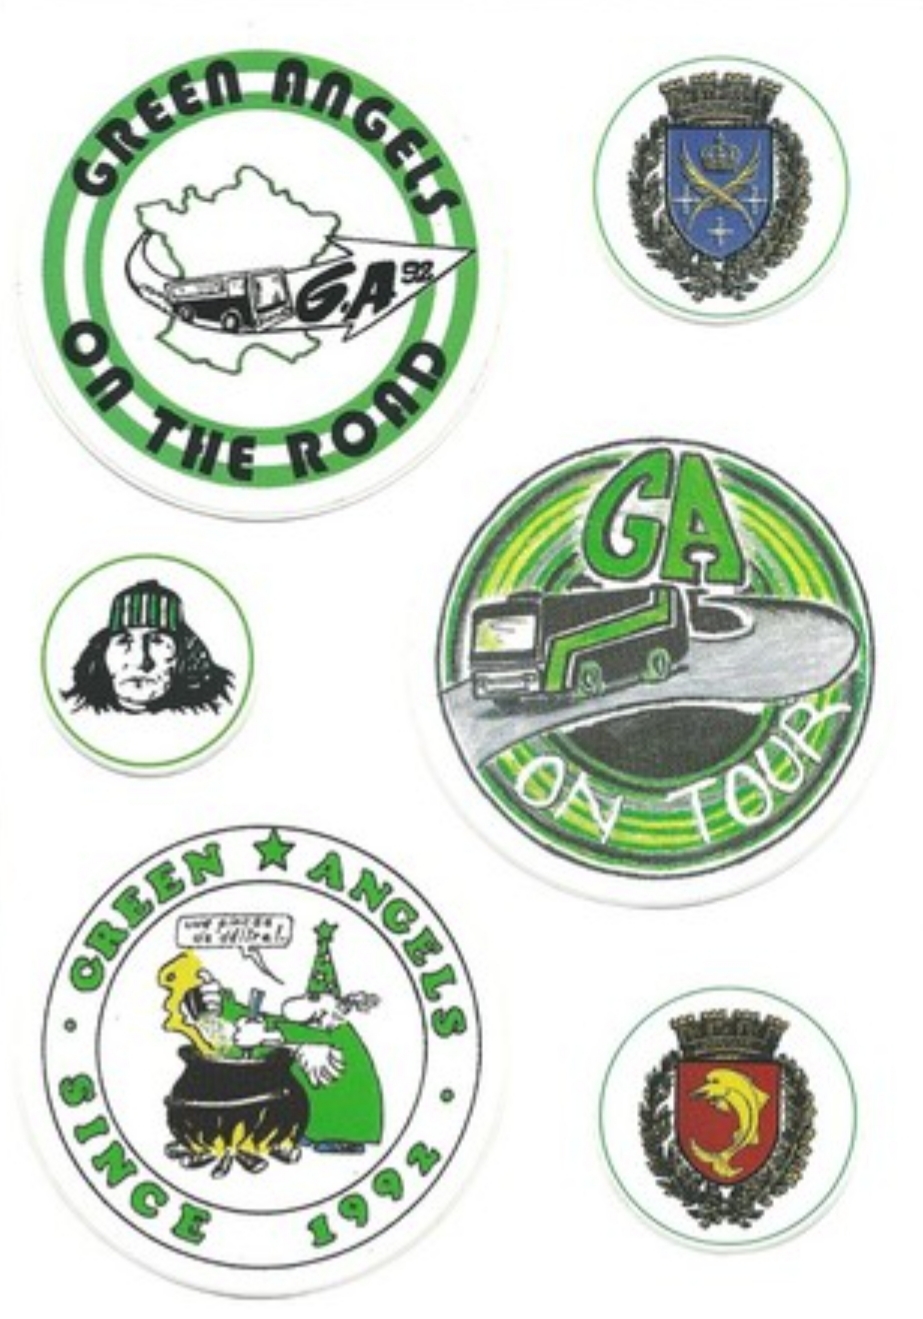 [Recherche] stickers Green Angels - Magic Fans - Fighters - Old Fighters Side - Warrior 20211015